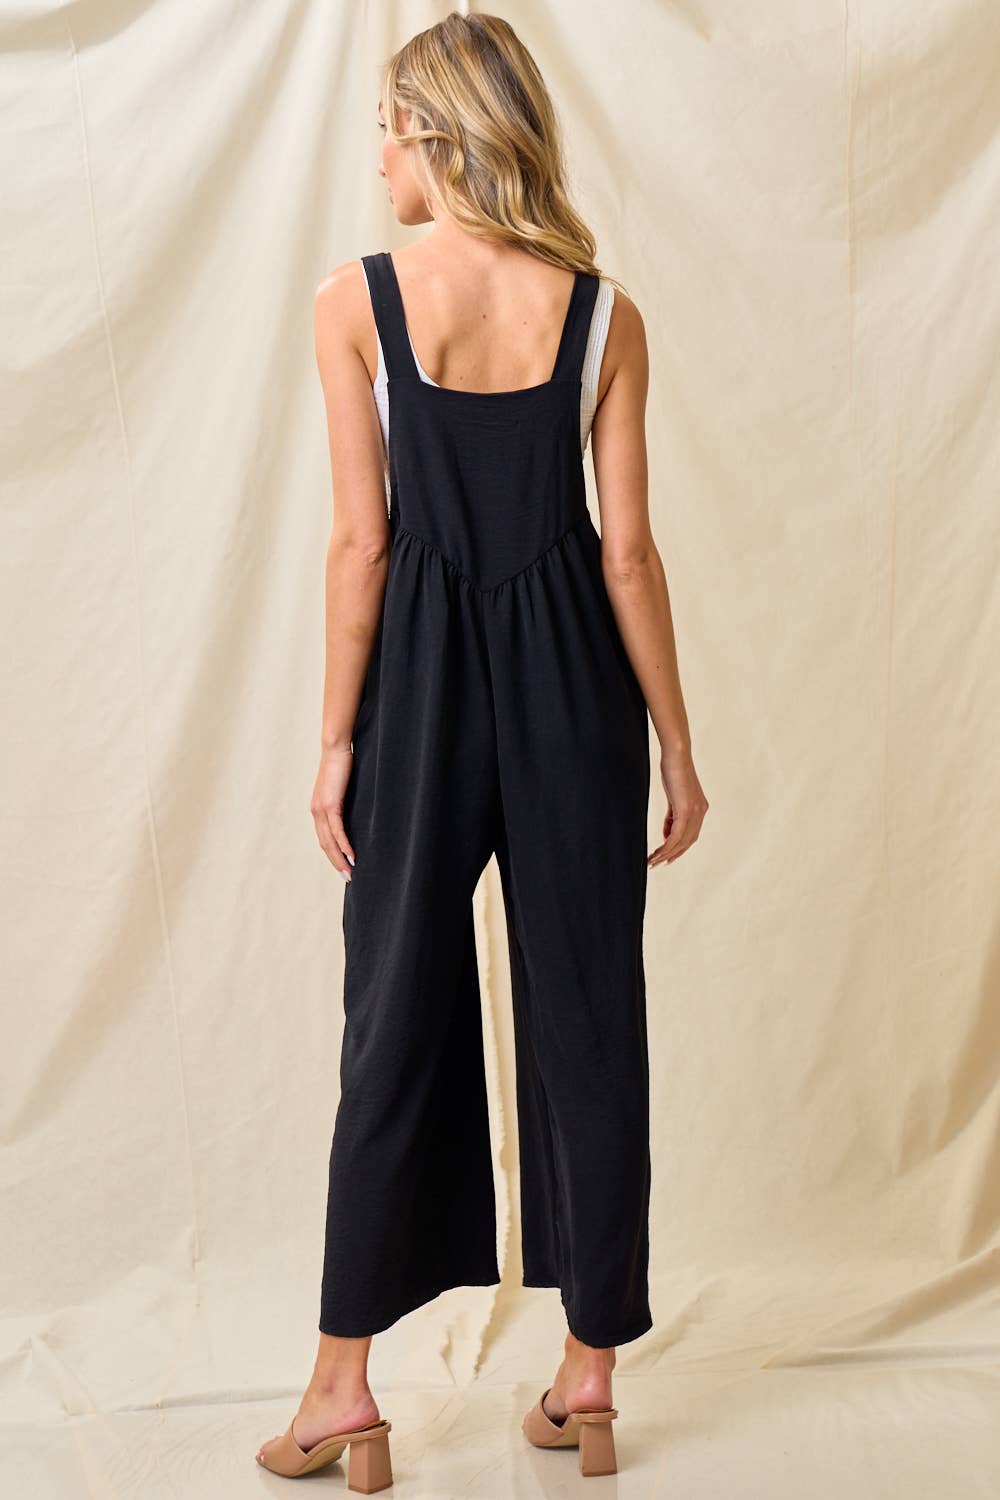 Trying to Stay Calm Black Jumpsuit